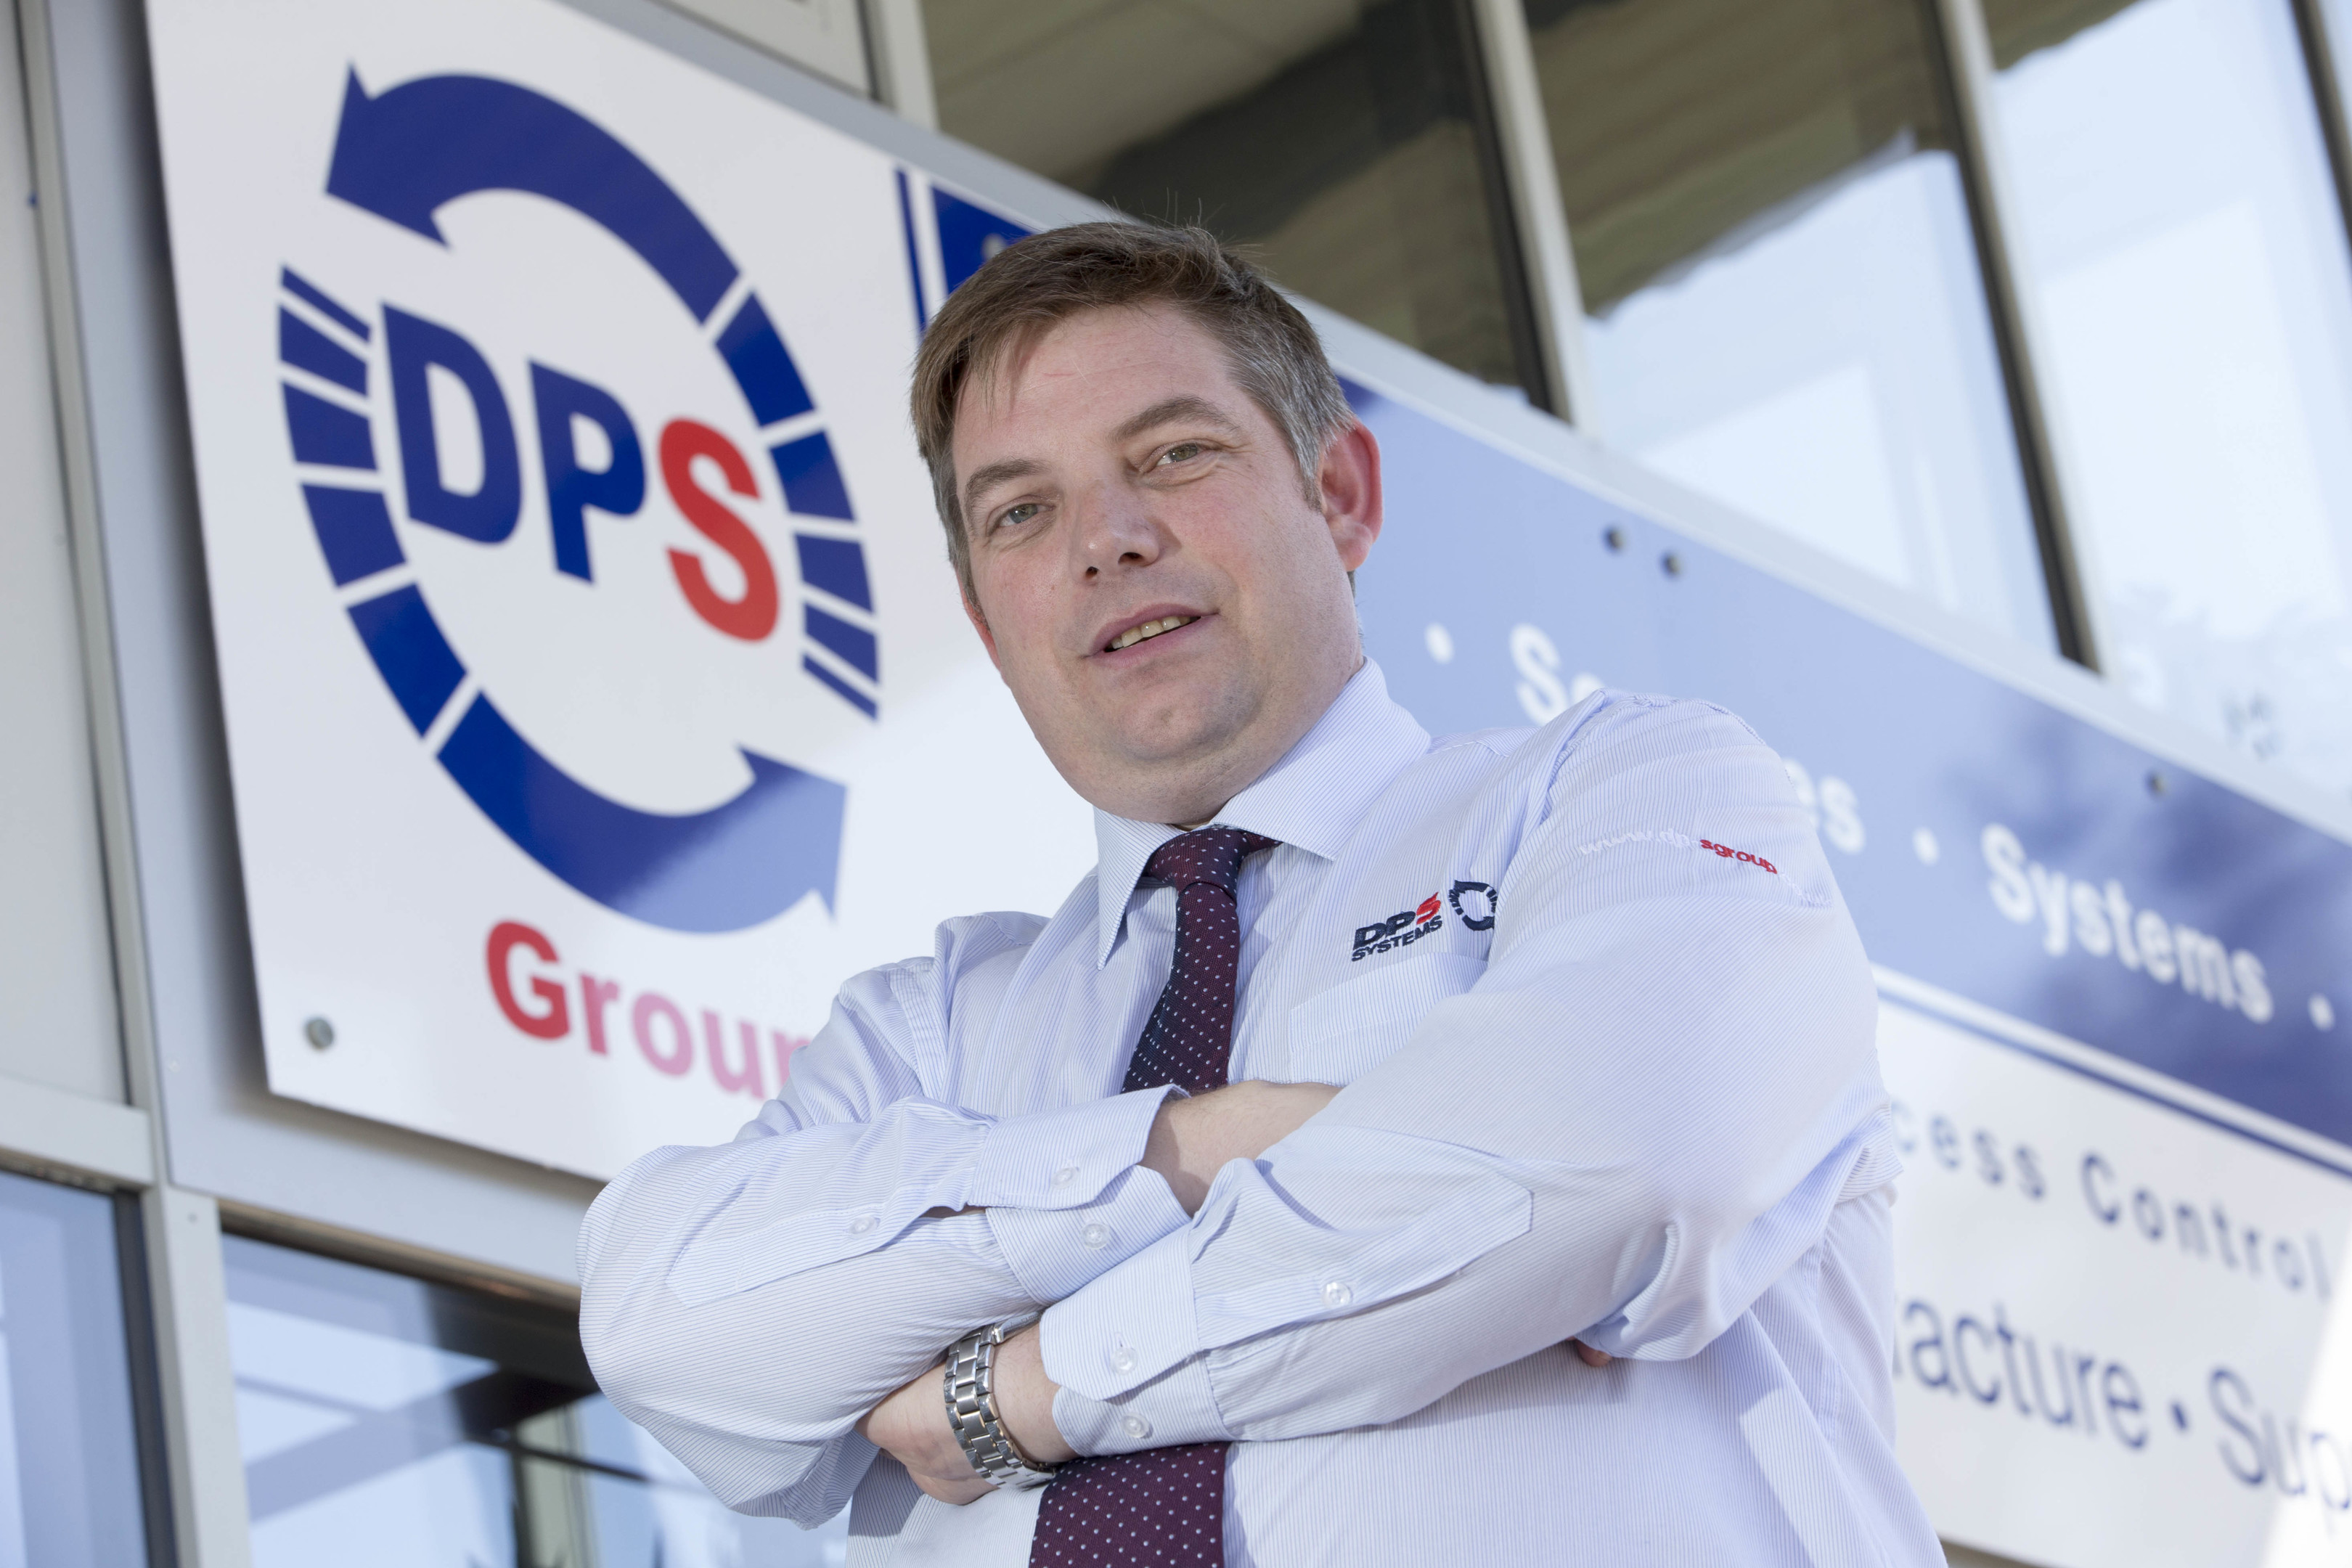 DPS Group director Martin Brownlee.